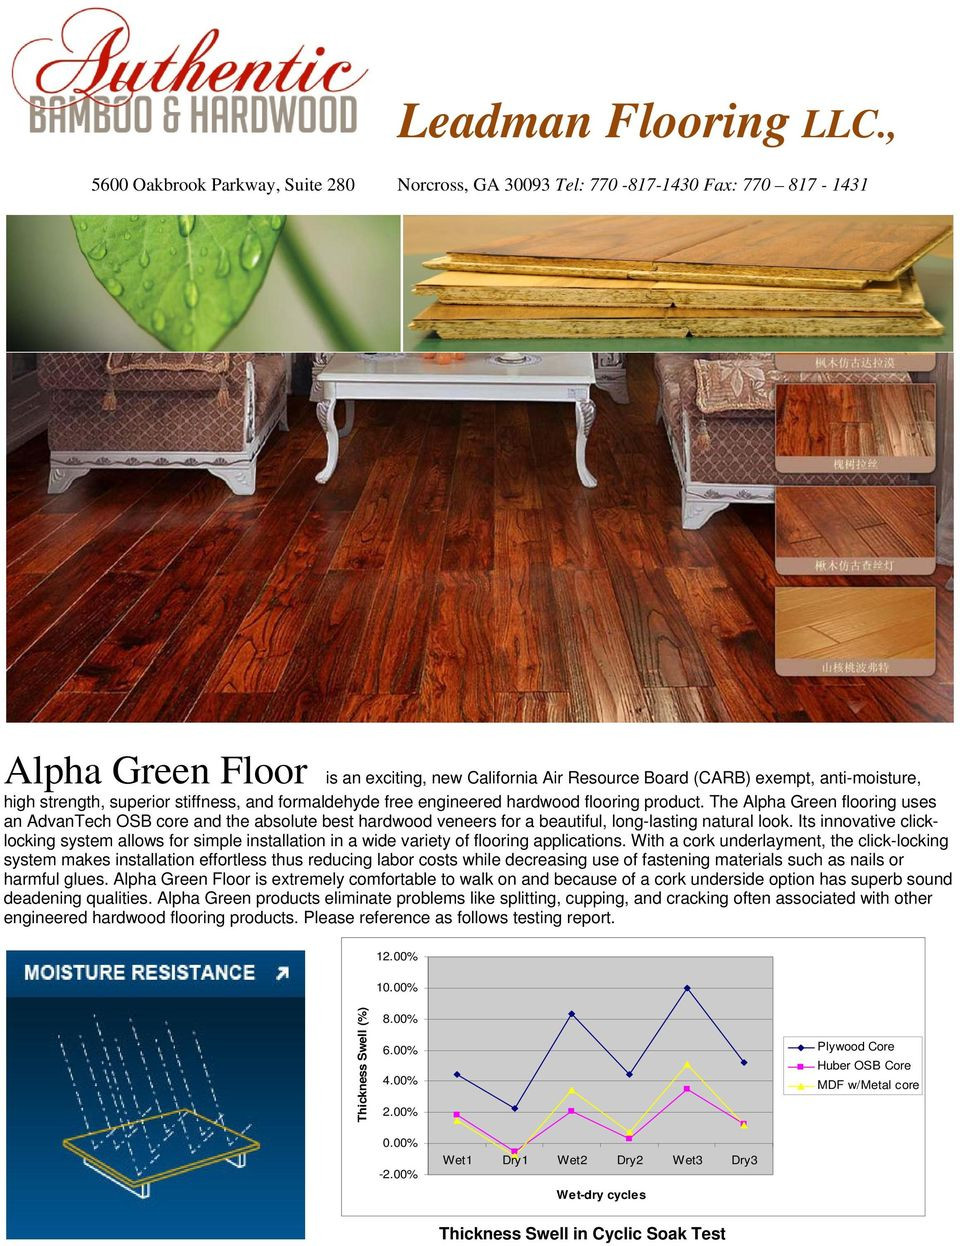 22 Unique Cleaning Engineered Hardwood Floors with Vinegar and Water 2024 free download cleaning engineered hardwood floors with vinegar and water of leadman flooring llc pdf intended for strength superior stiffness and formaldehyde free engineered hardwood flooring product